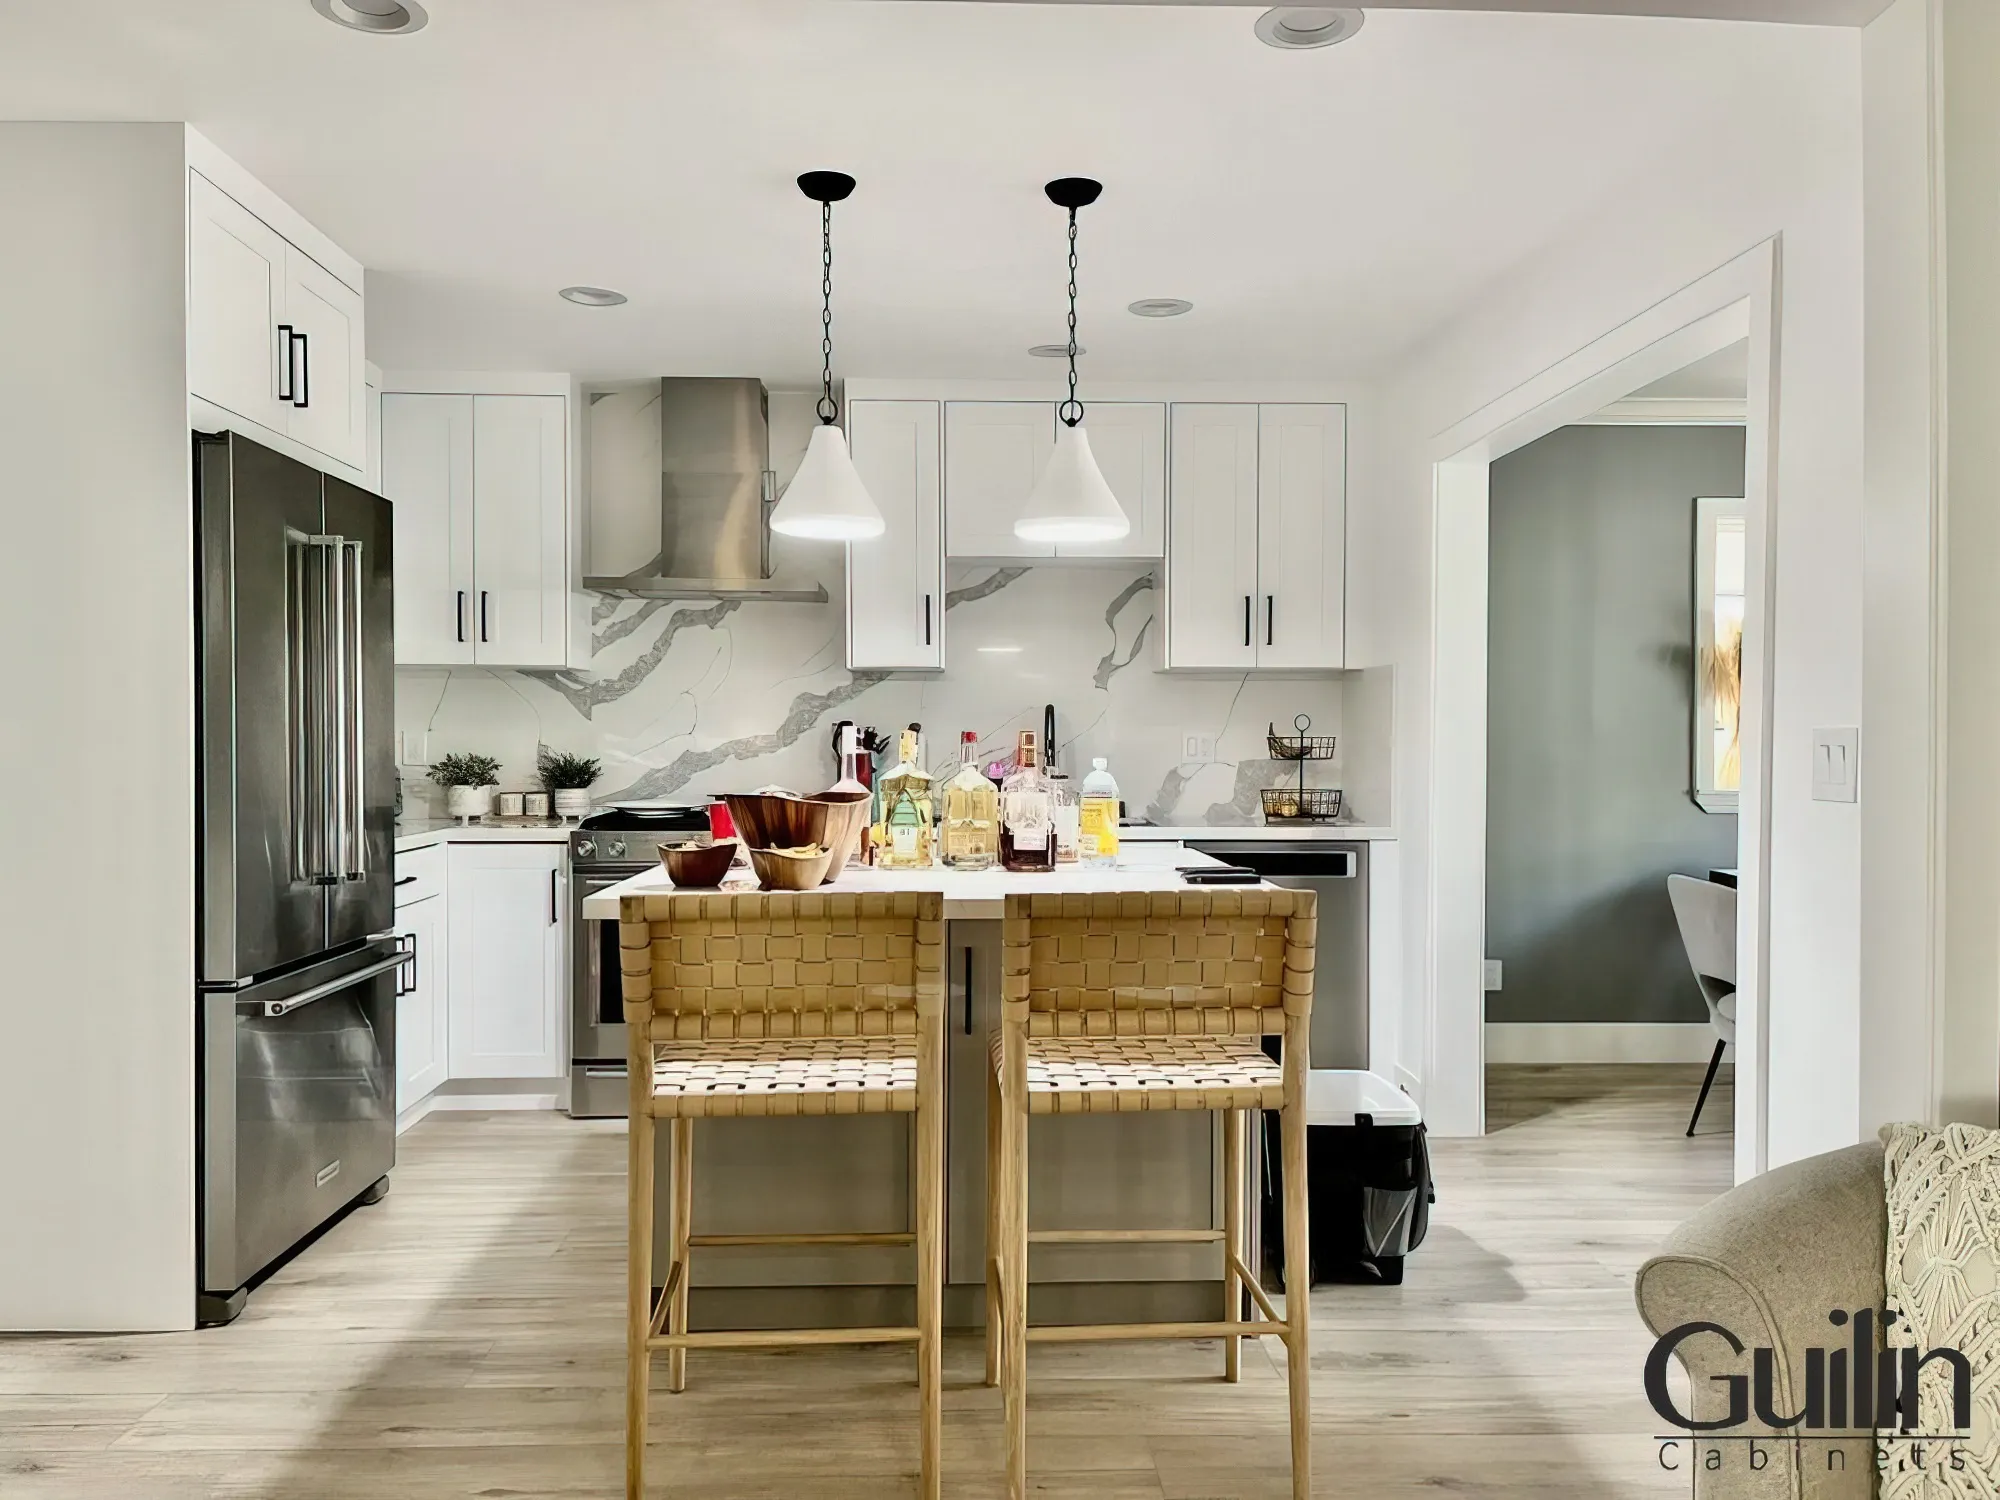 In today's market, buyers are often drawn to kitchens that reflect the latest design trends. 